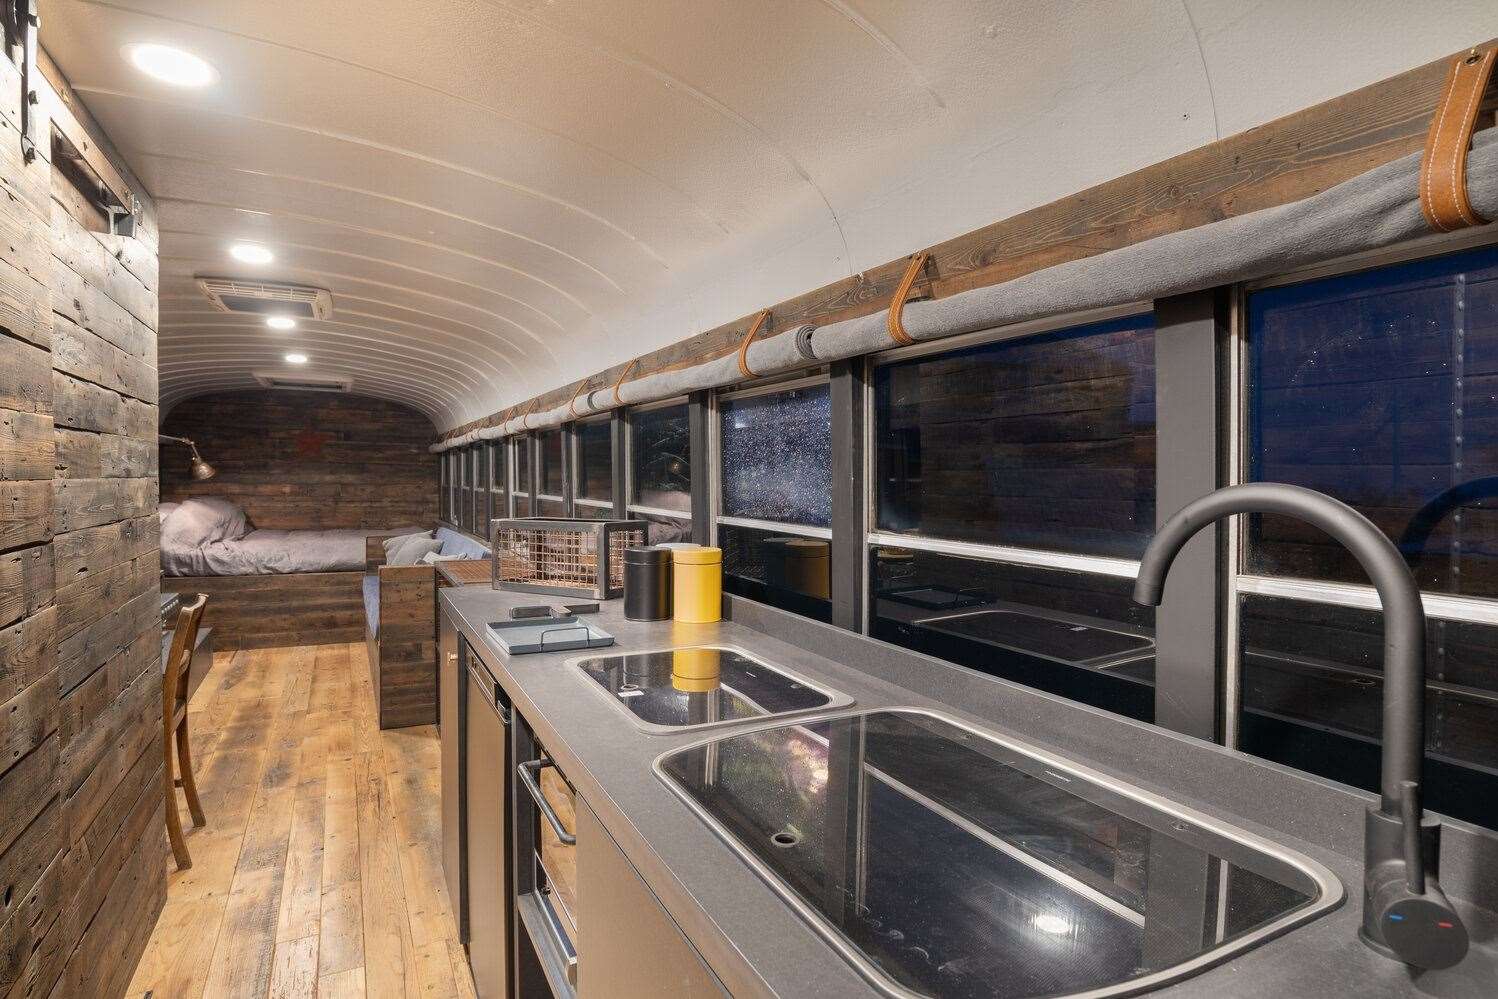 Converted American school bus Stay Wild is now an off grid retreat at Ash near Sandwich